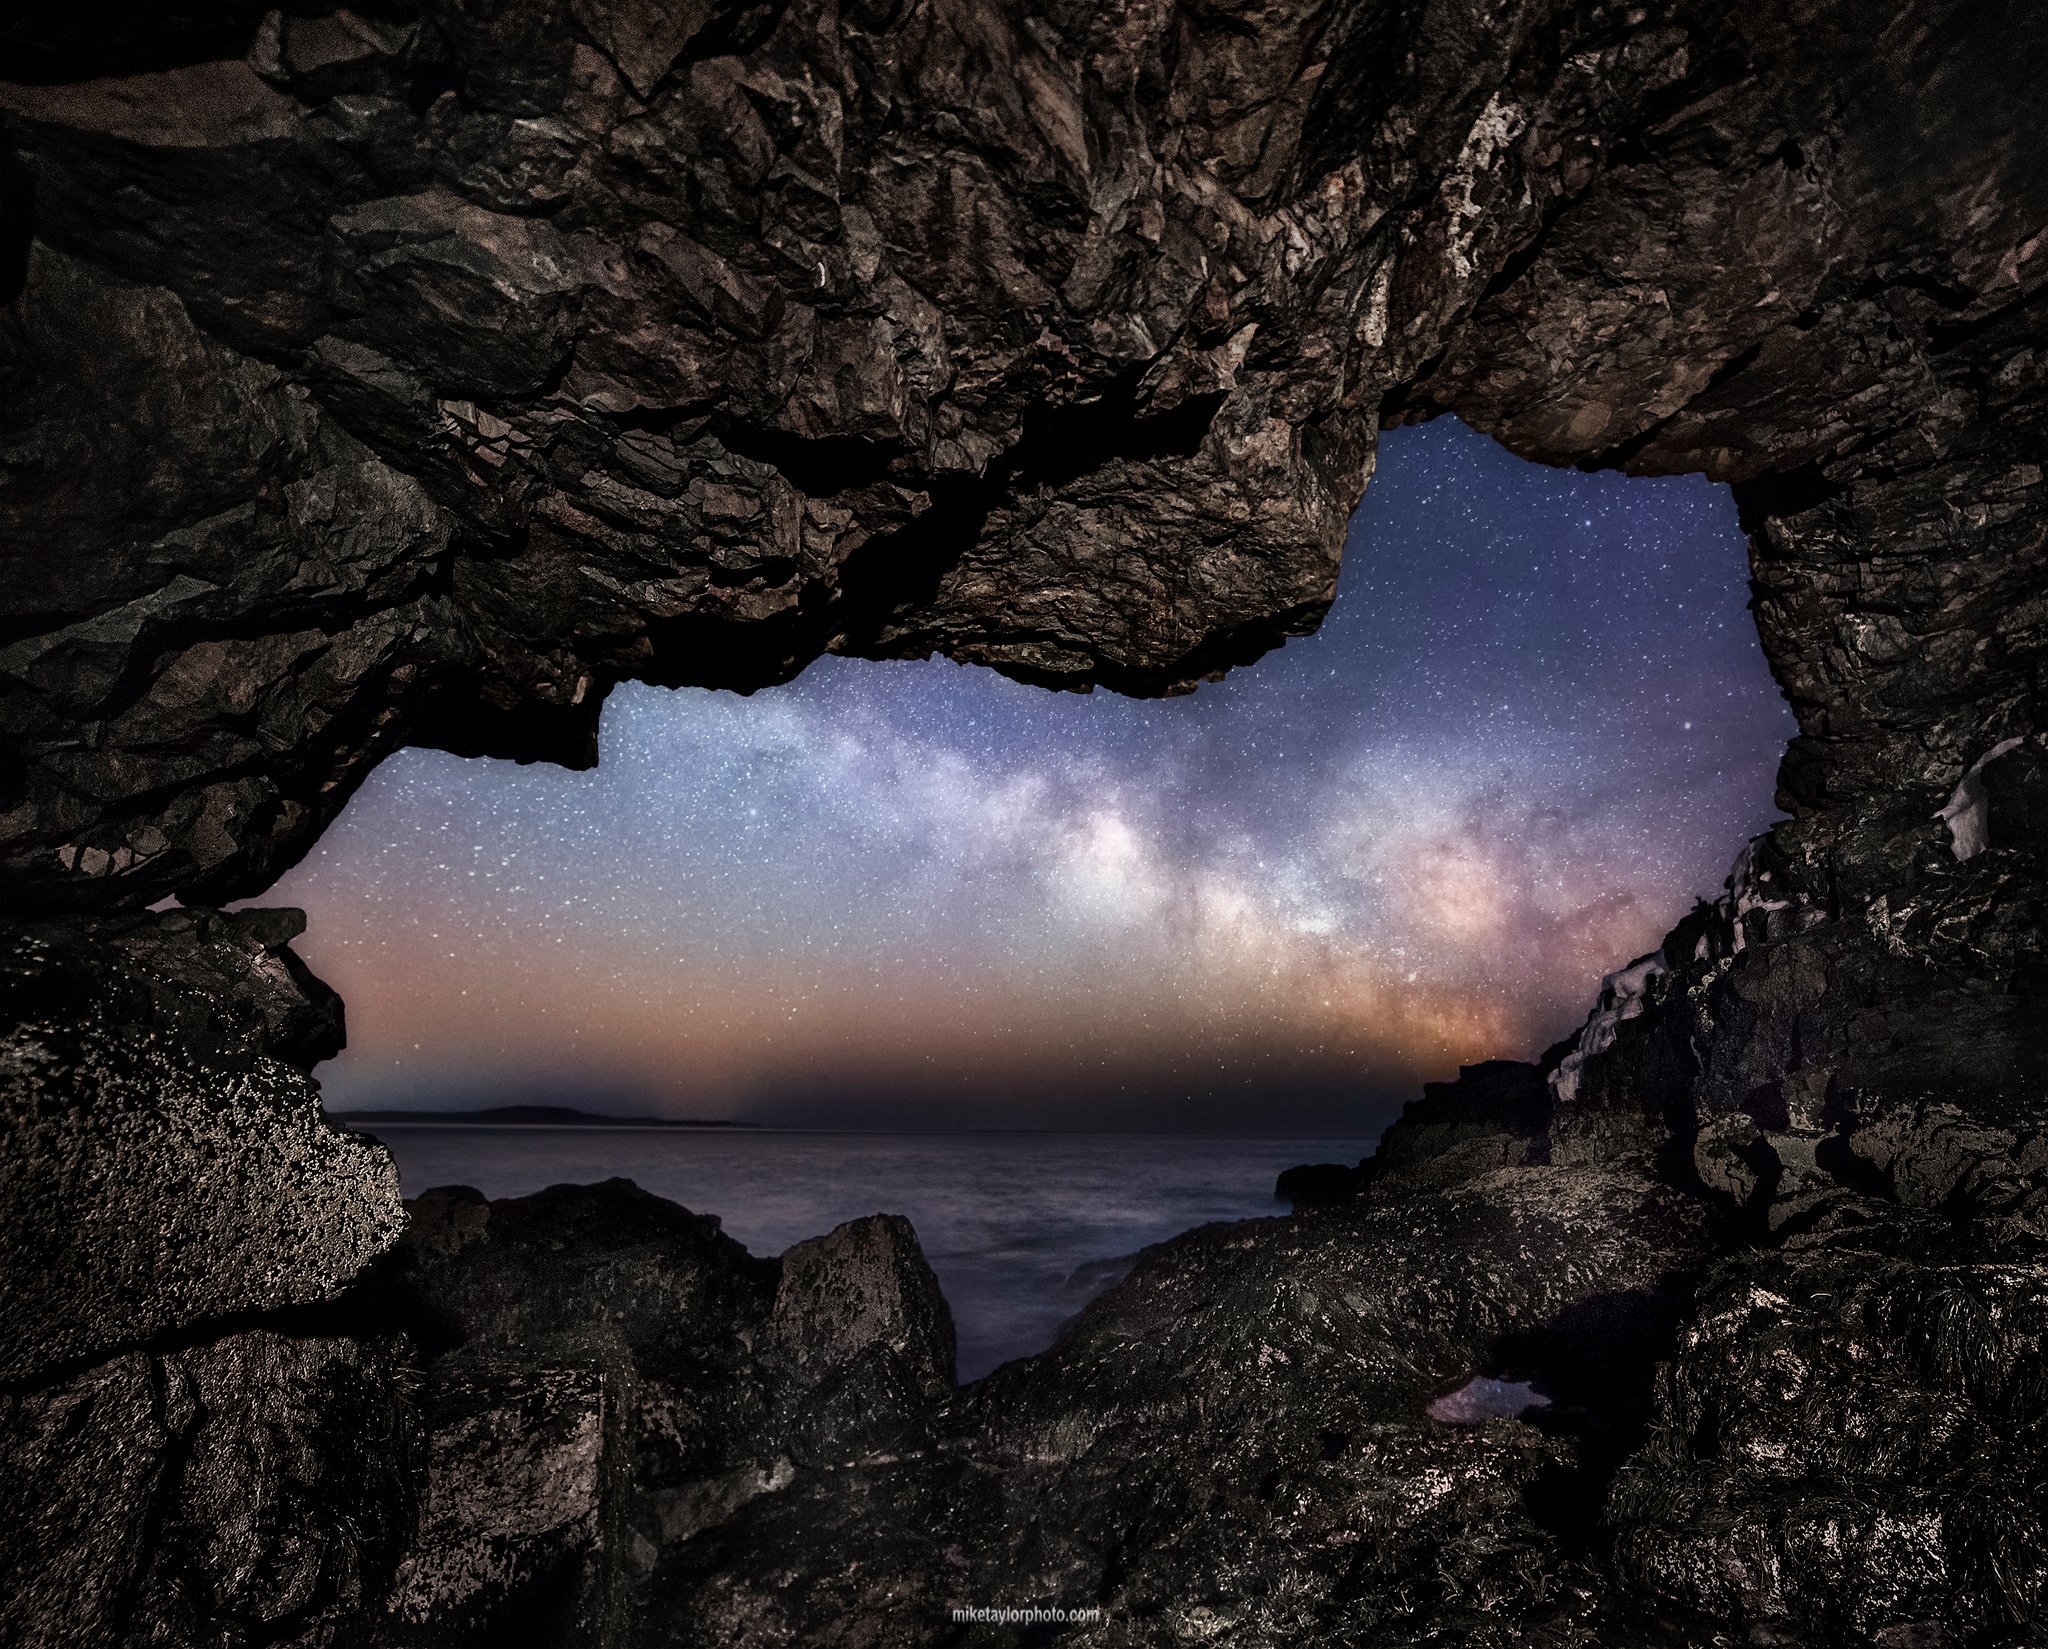 Milky Way through a cave in Acadia National Park, Maine by Mike Taylor Photography @mtaylor_photo